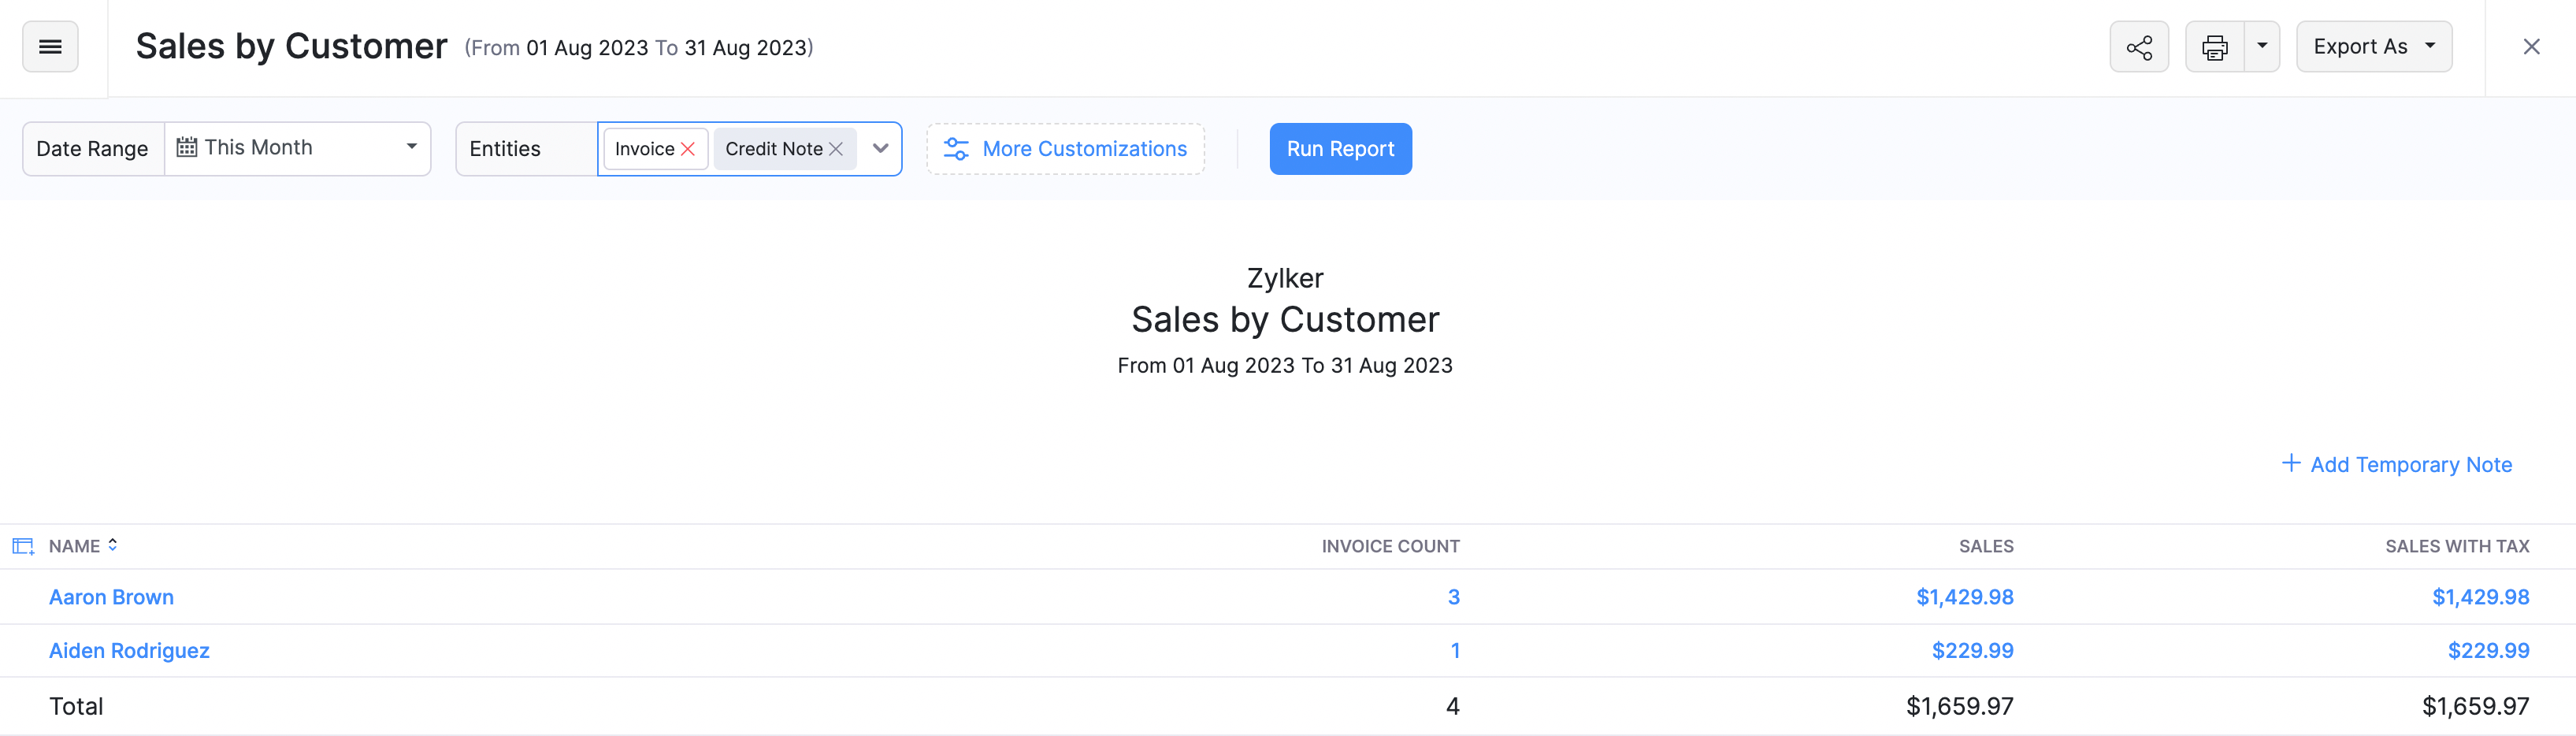 Sales by Customer Report